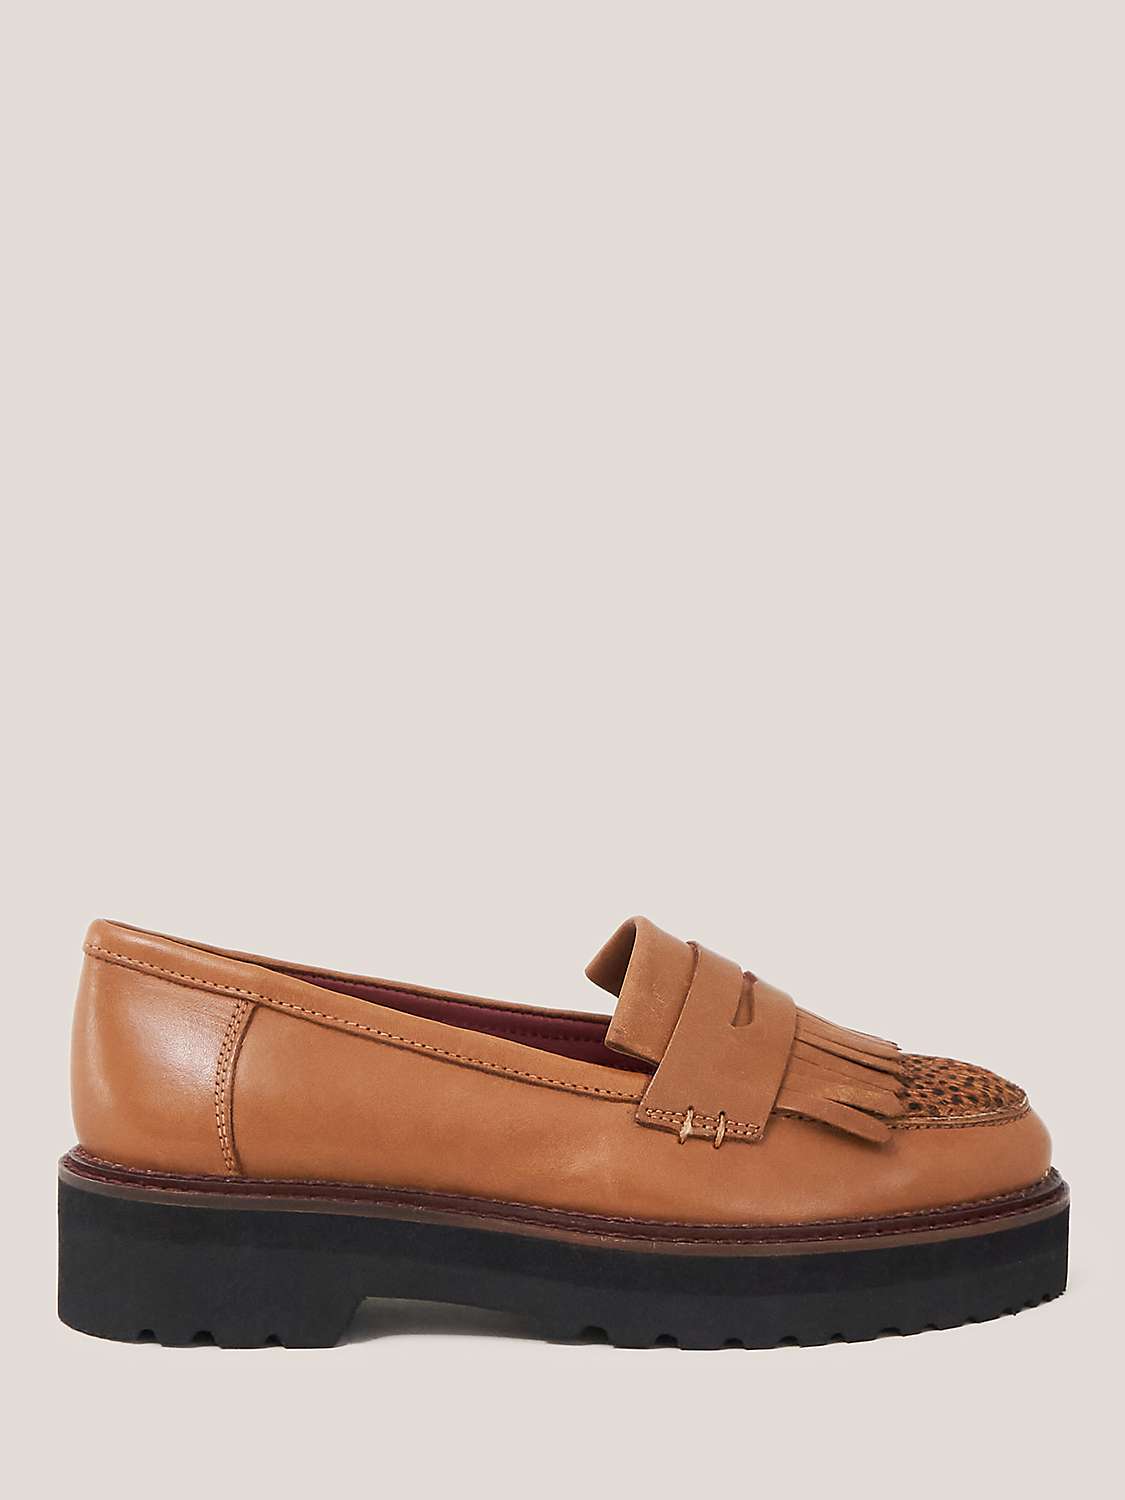 Buy White Stuff  Elva Chunky Leather Loafer, Tan Online at johnlewis.com